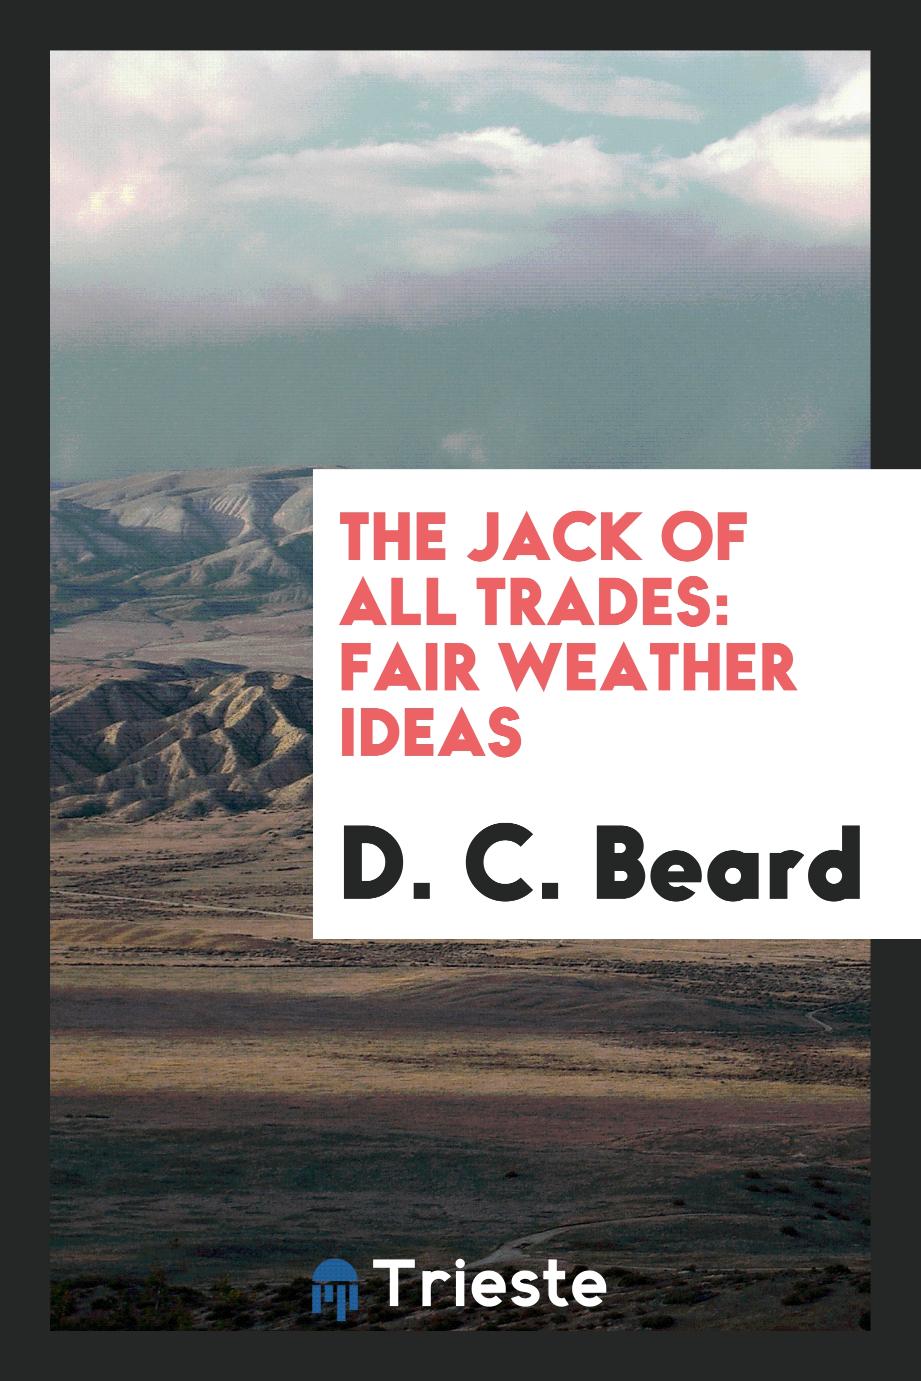 The Jack of All Trades: Fair Weather Ideas